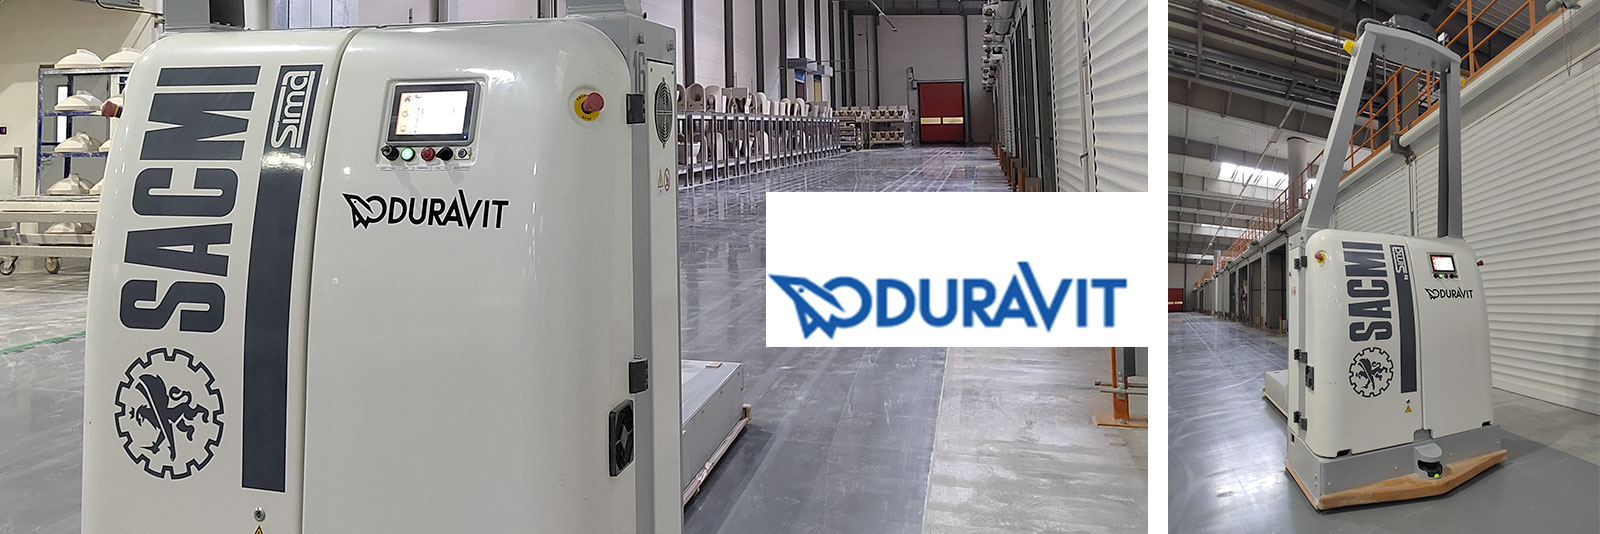 Duravit China continues to grow with SACMI LaserMove